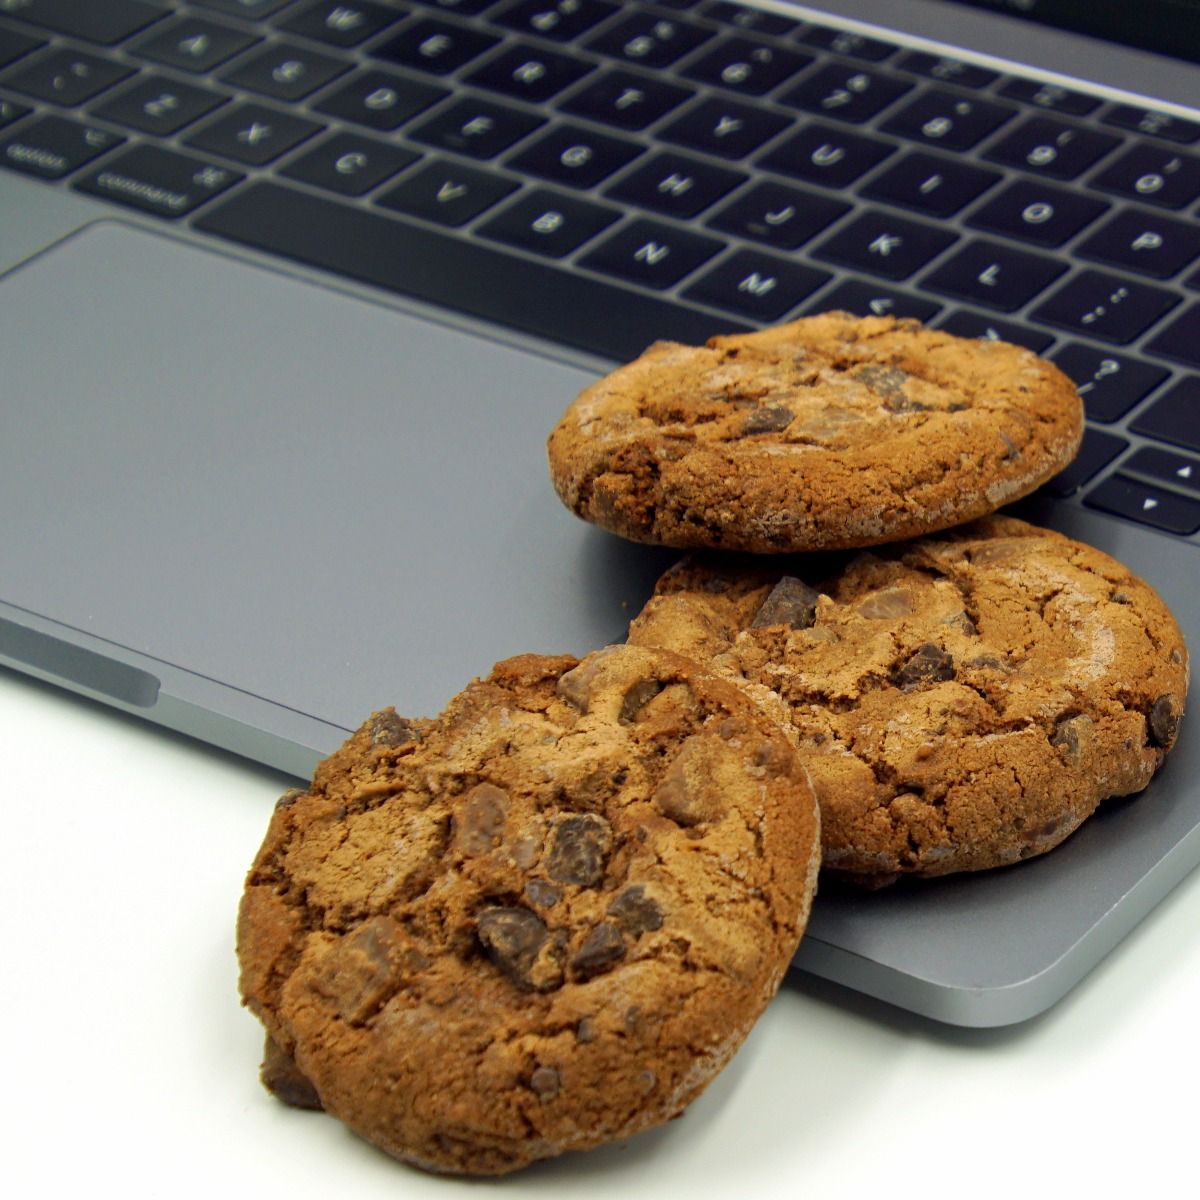 chocolate chip cookies sitting on a laptop keyboard